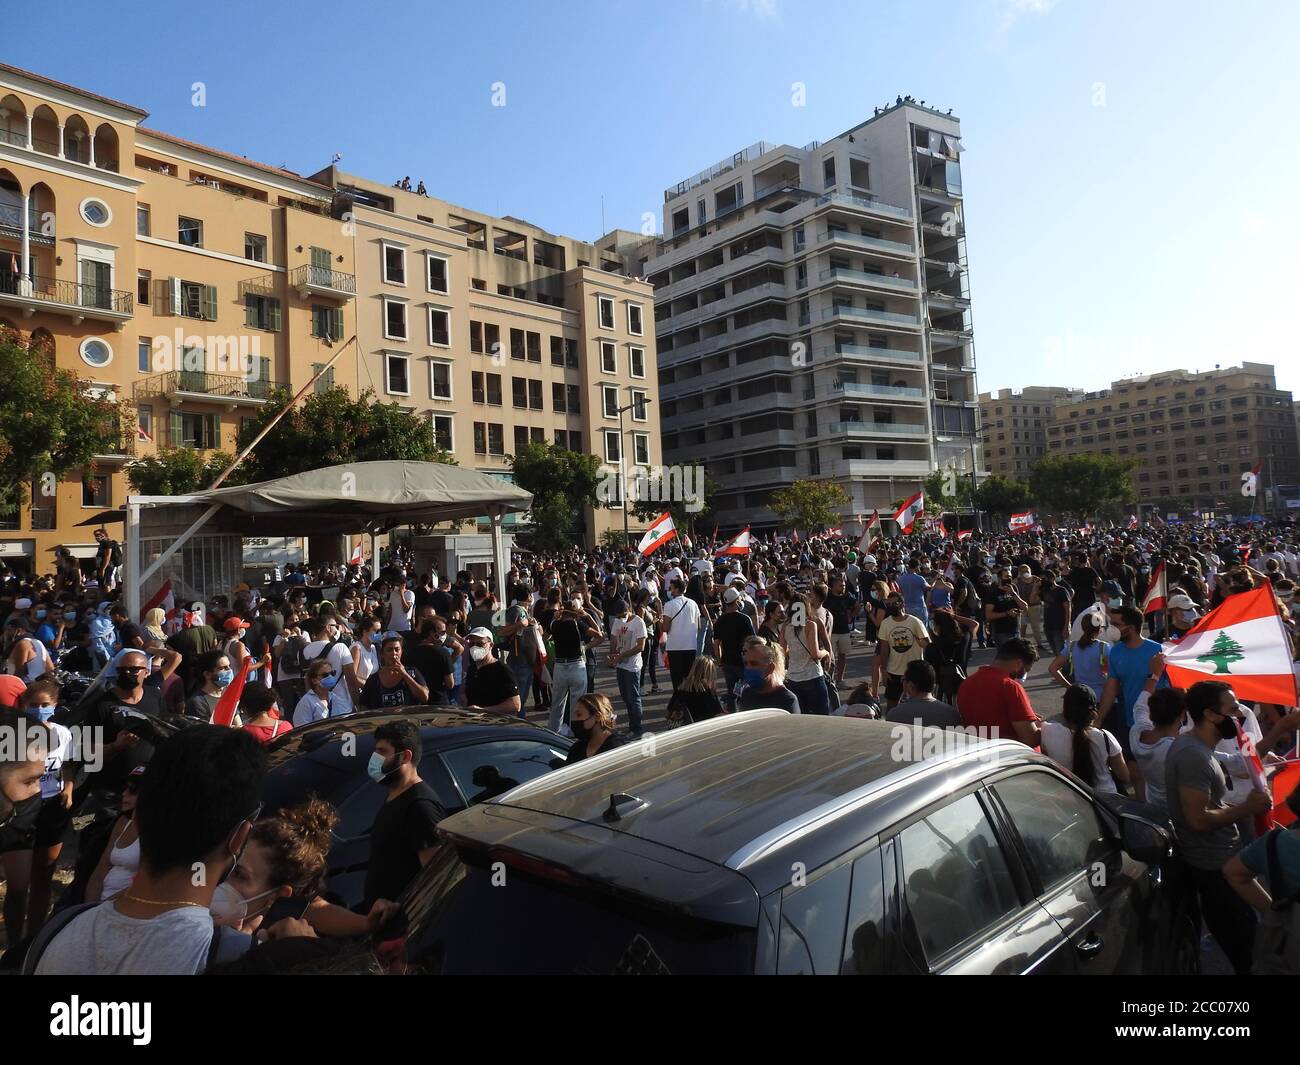 Beirut, Lebanon - August 8, 2020: Martyrs' Square during the Lebanese Revolution after the blast, against the current government, and against corrupti Stock Photo